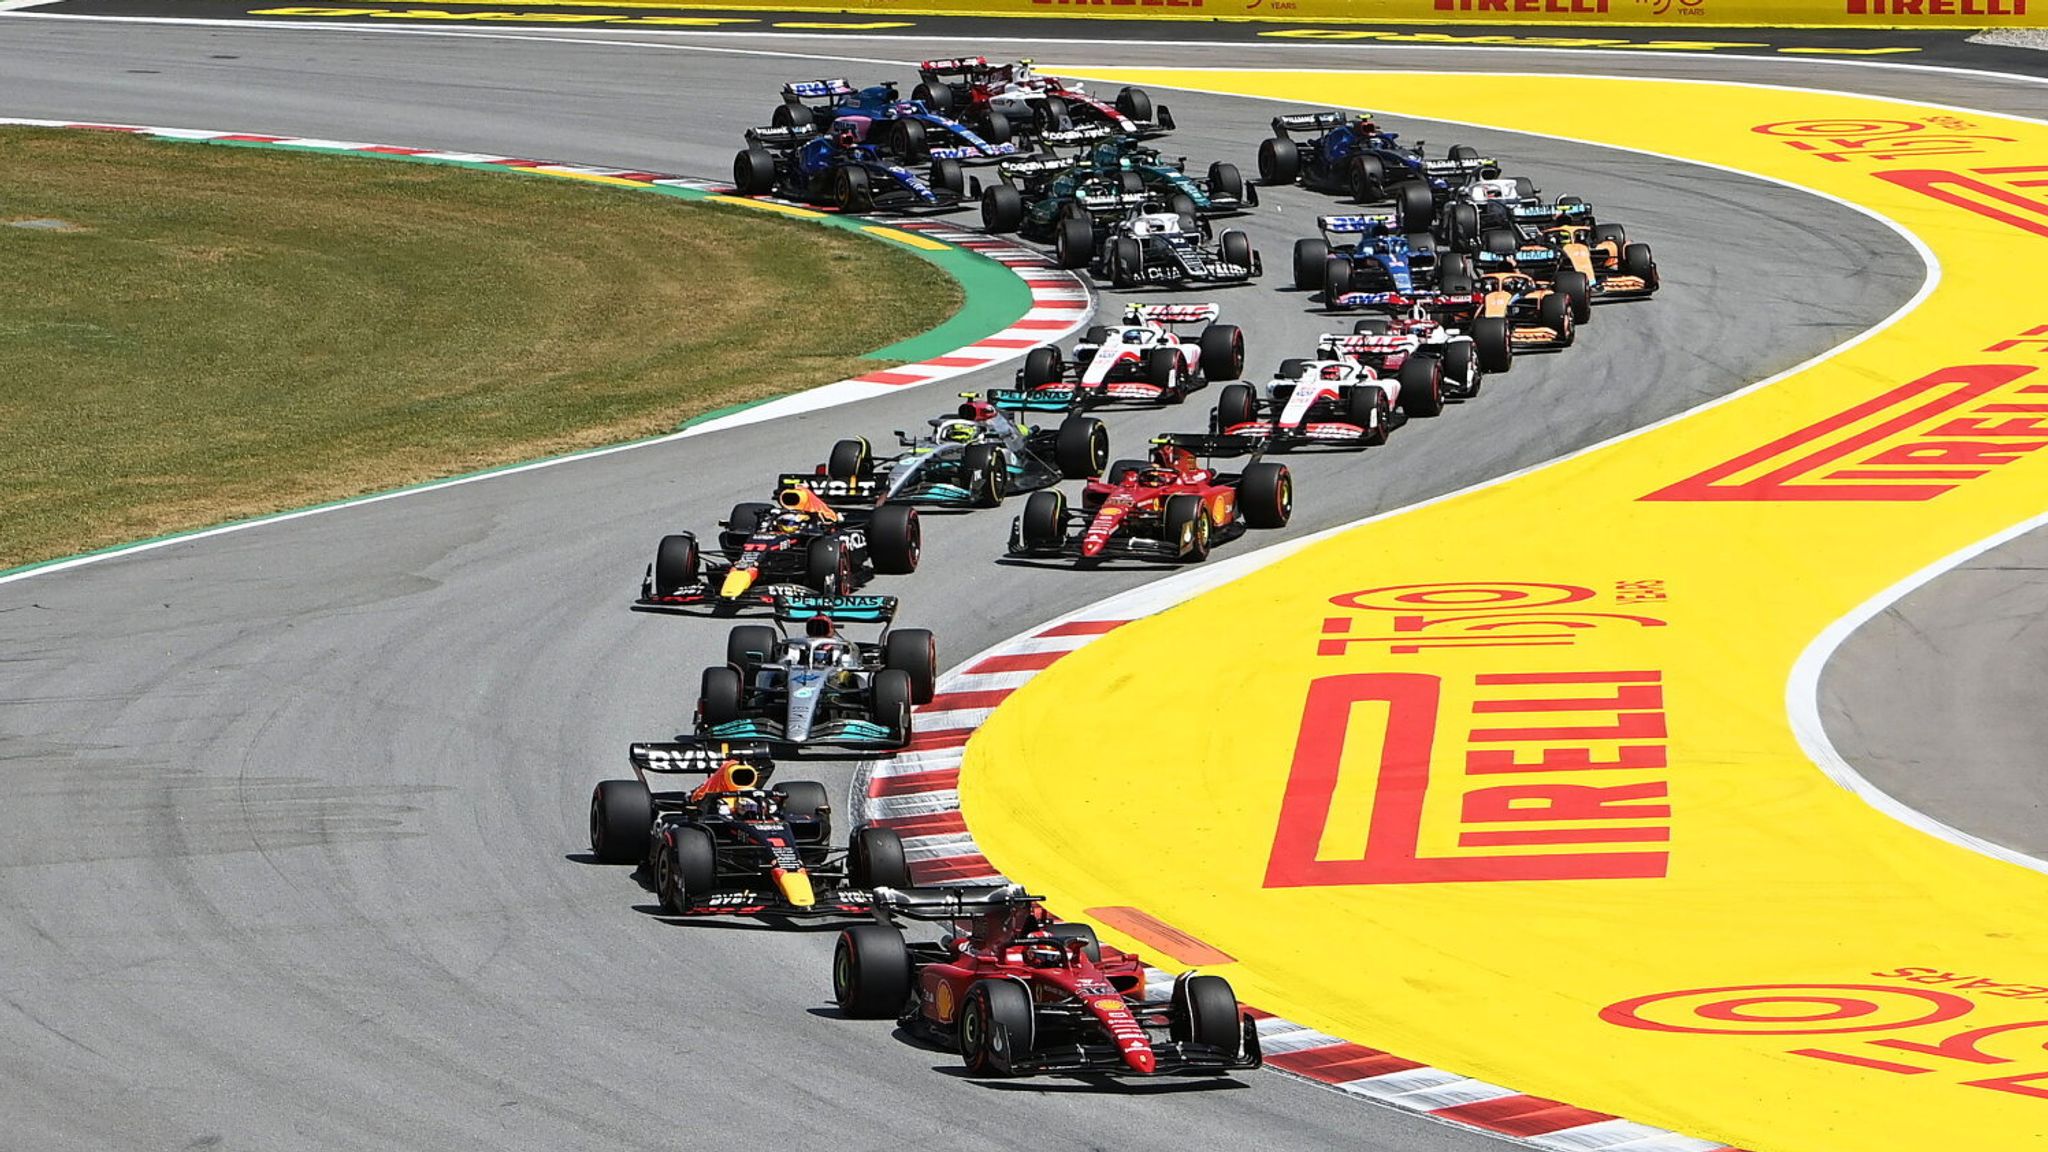 Spanish GP F1 2023s true pecking order to be revealed at Circuit de Catalunya this weekend? F1 News